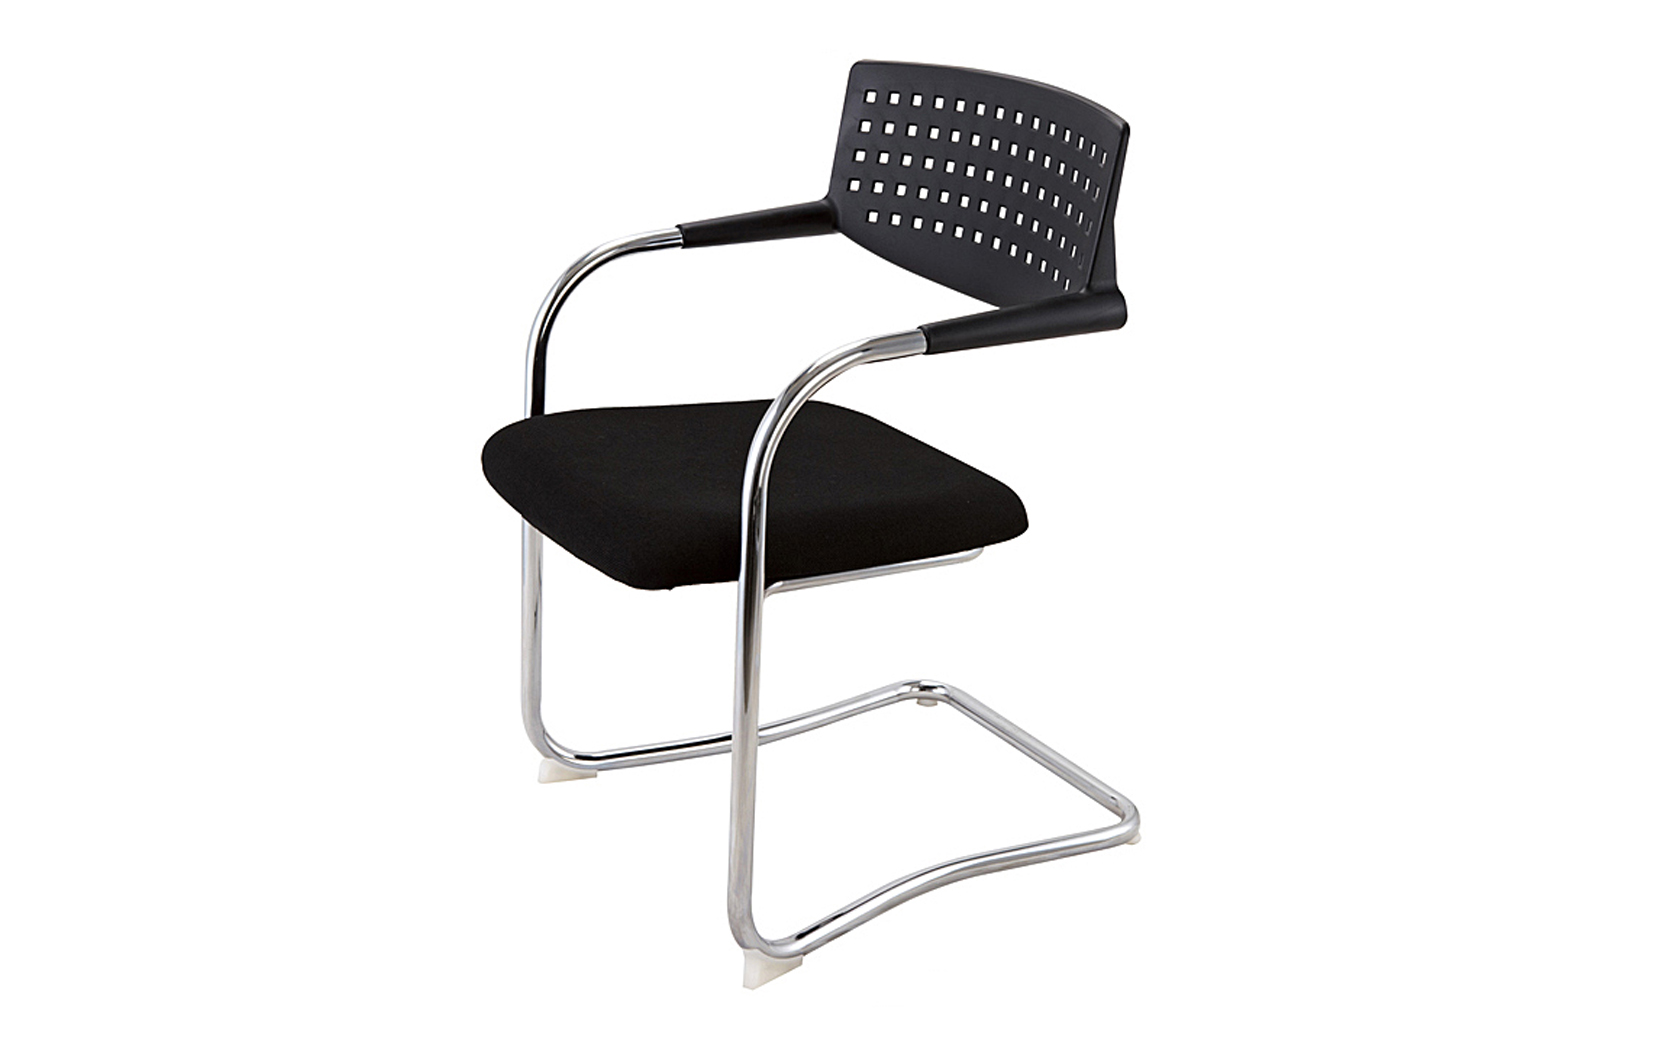 Boardroom , Meeting or Dining Visa chair , black cushion seat , designer perforated nylon back  and stylish chrome cantilever frame executive 